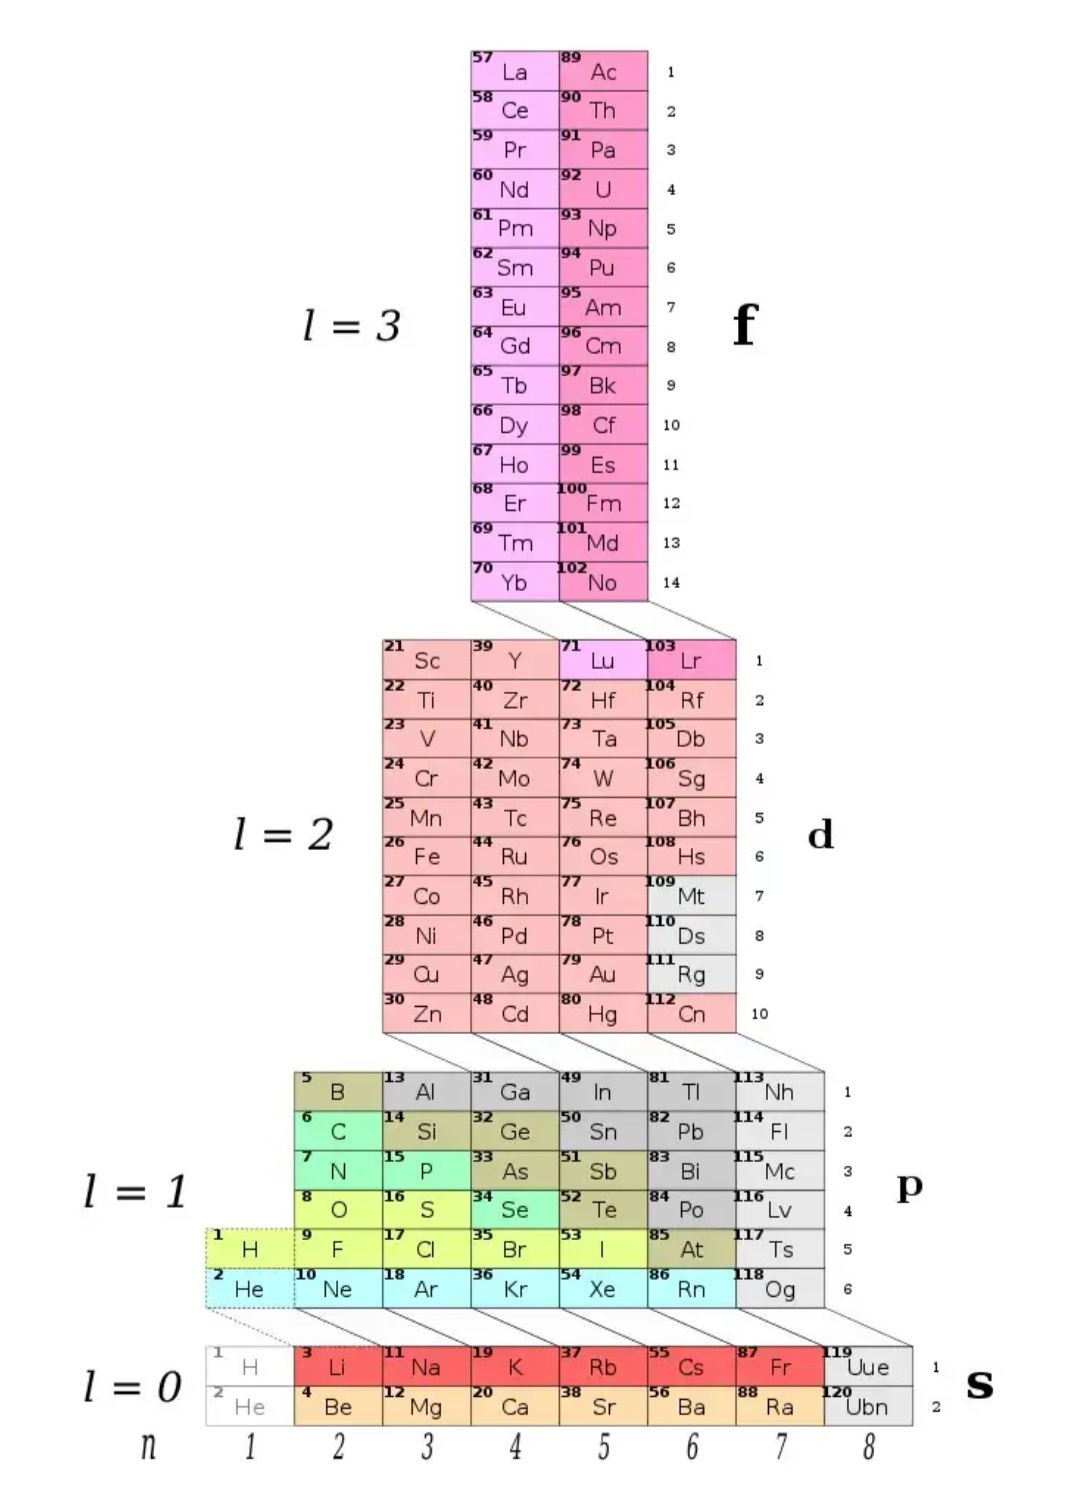 The tower-like periodic table design 